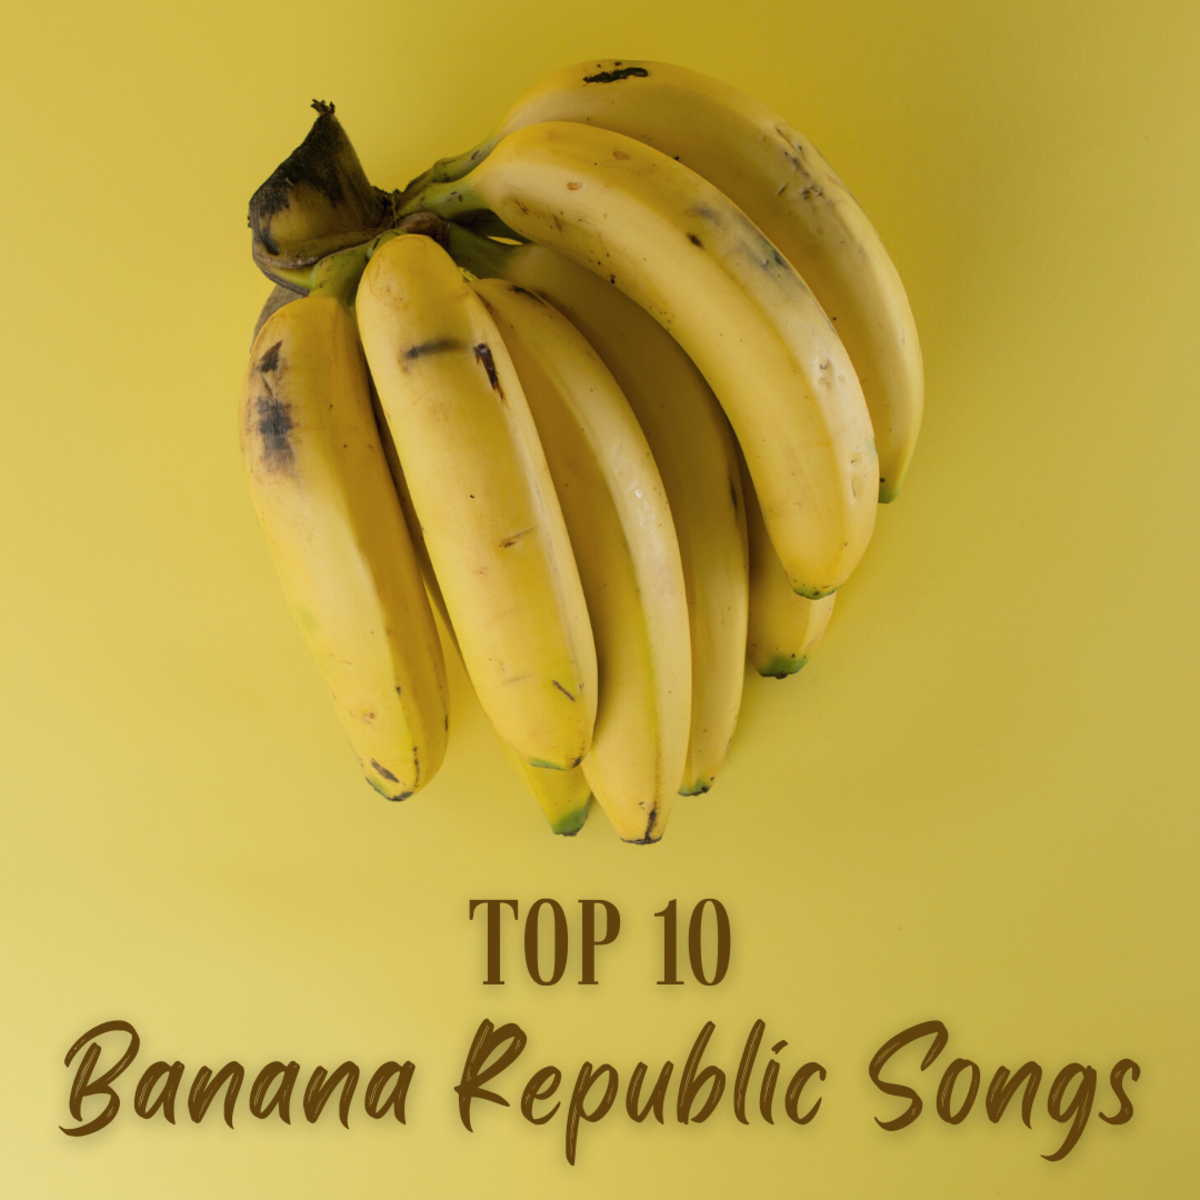 The term "Banana Republic" is applied to a handful of Central American countries, where the major export crop is bananas.